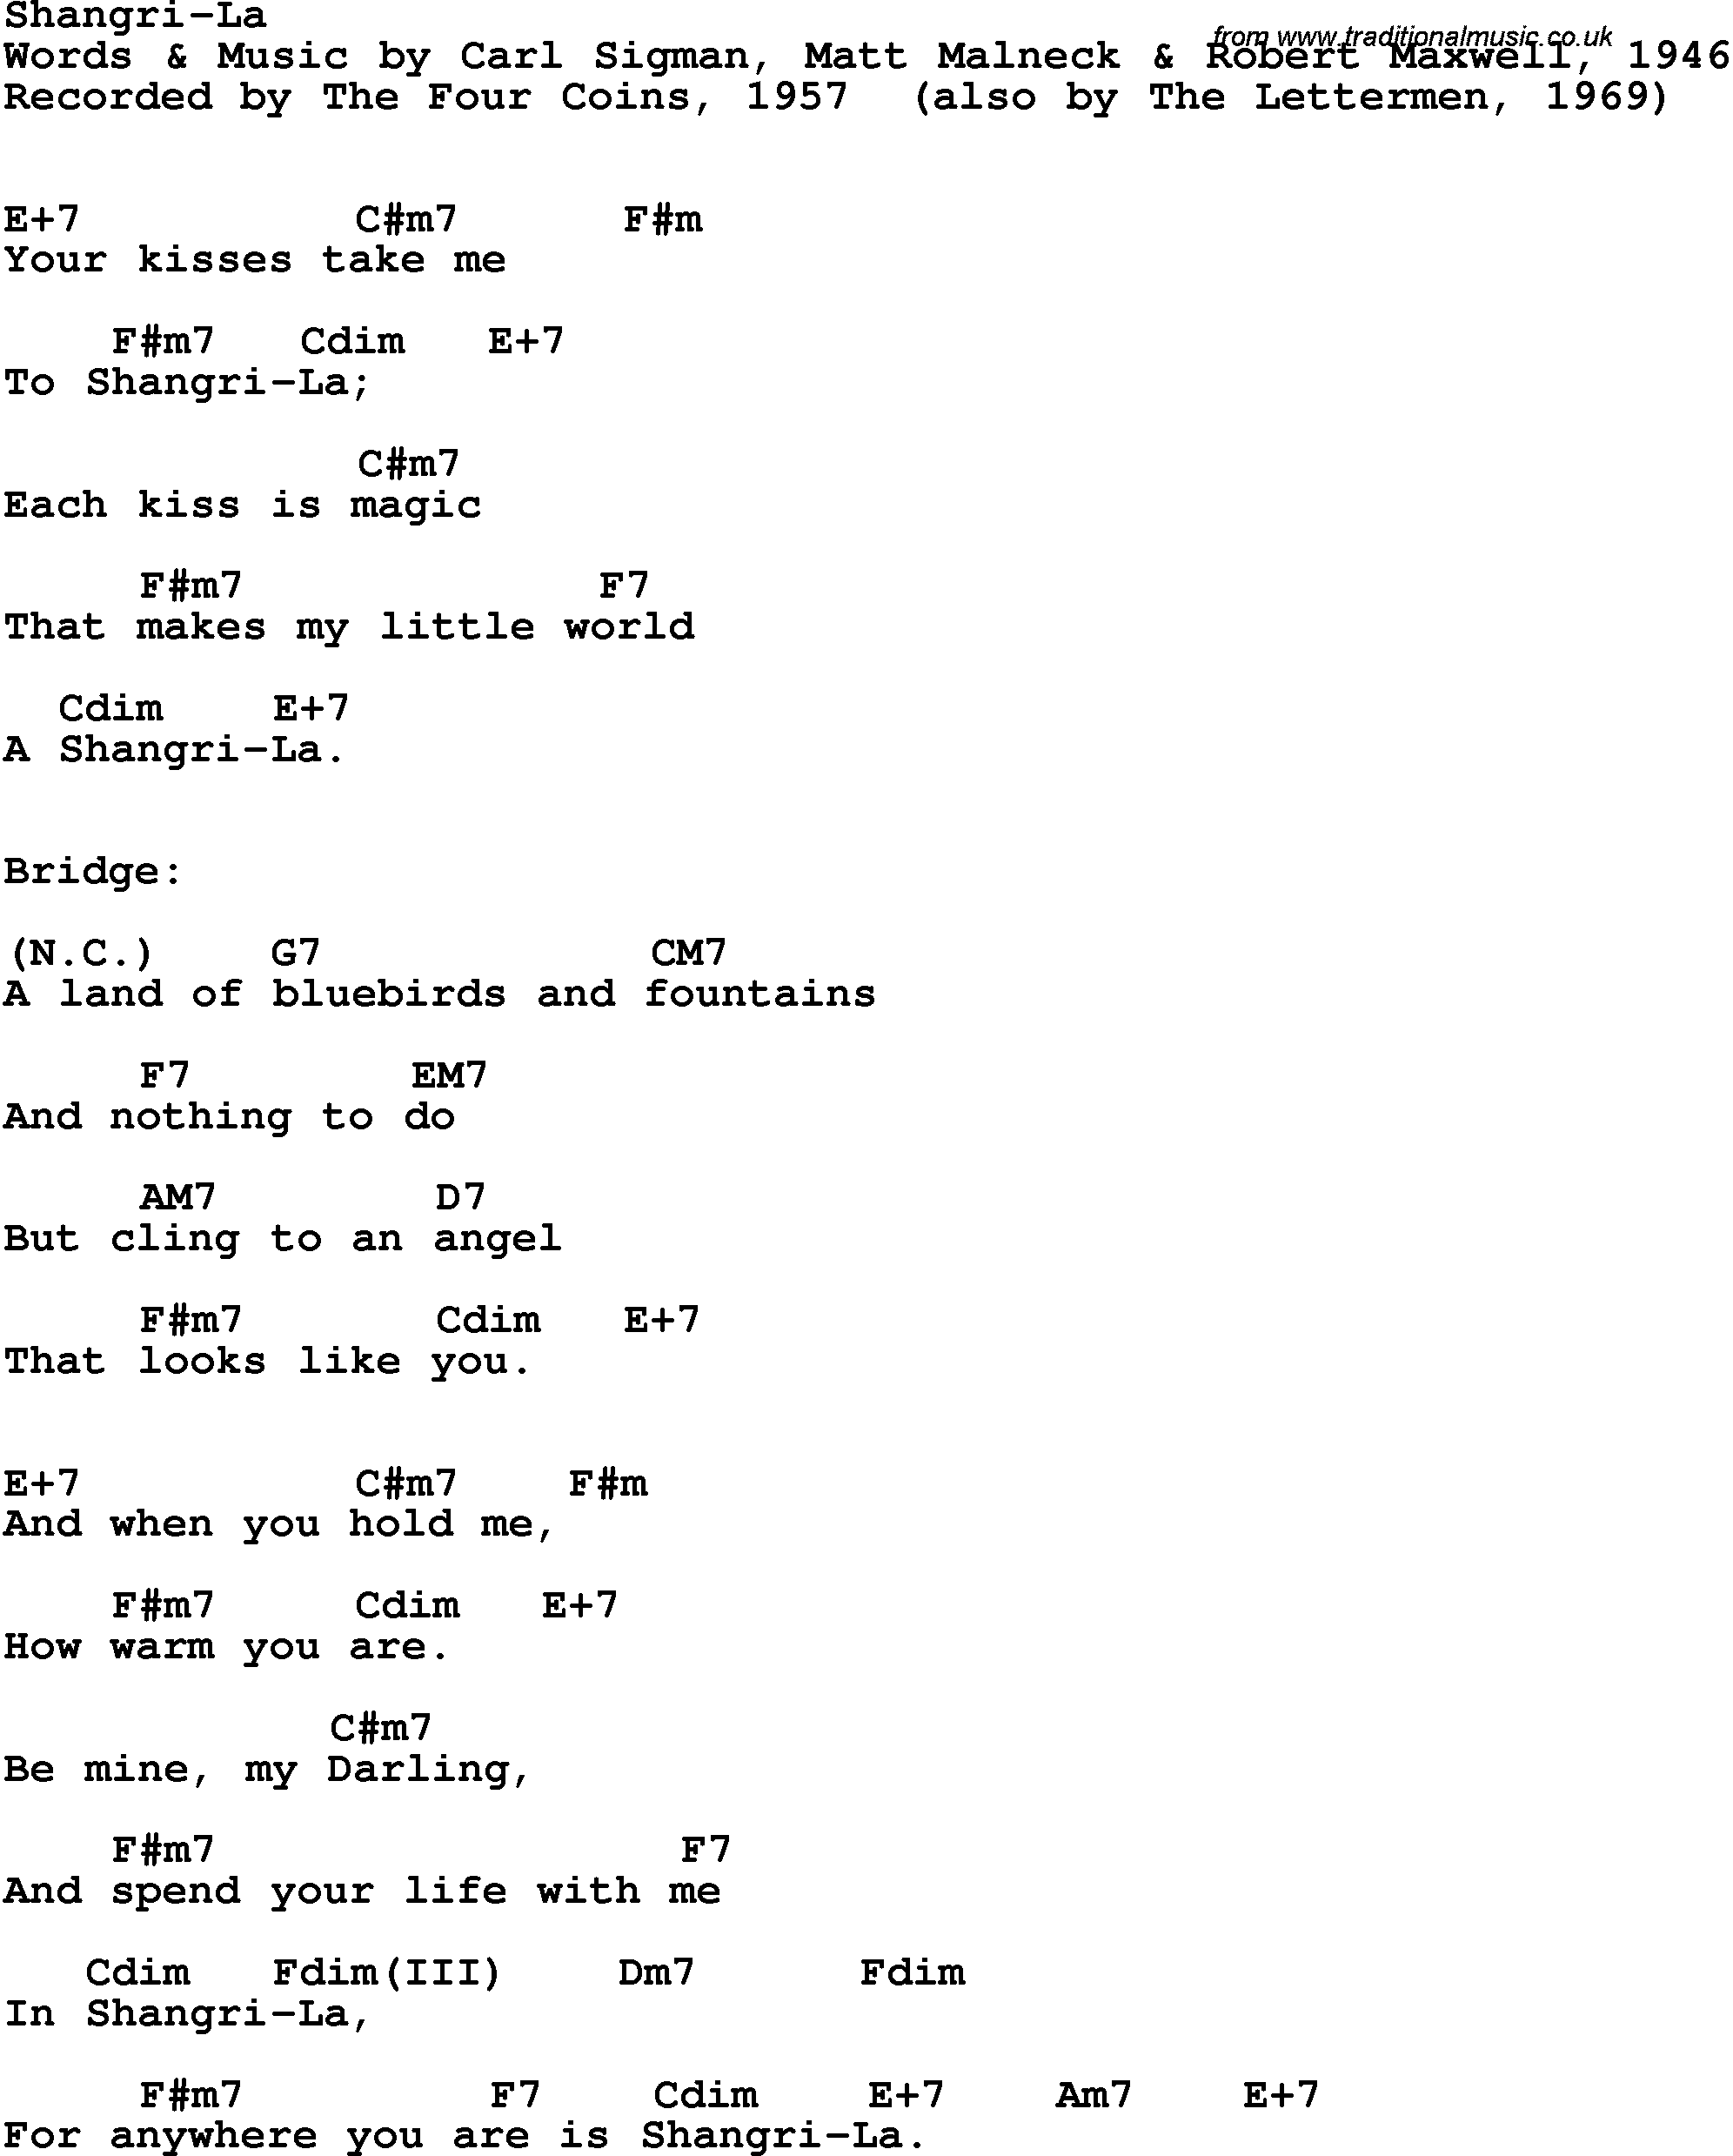 Song Lyrics with guitar chords for Shangri-la - The Four Coins, 1957